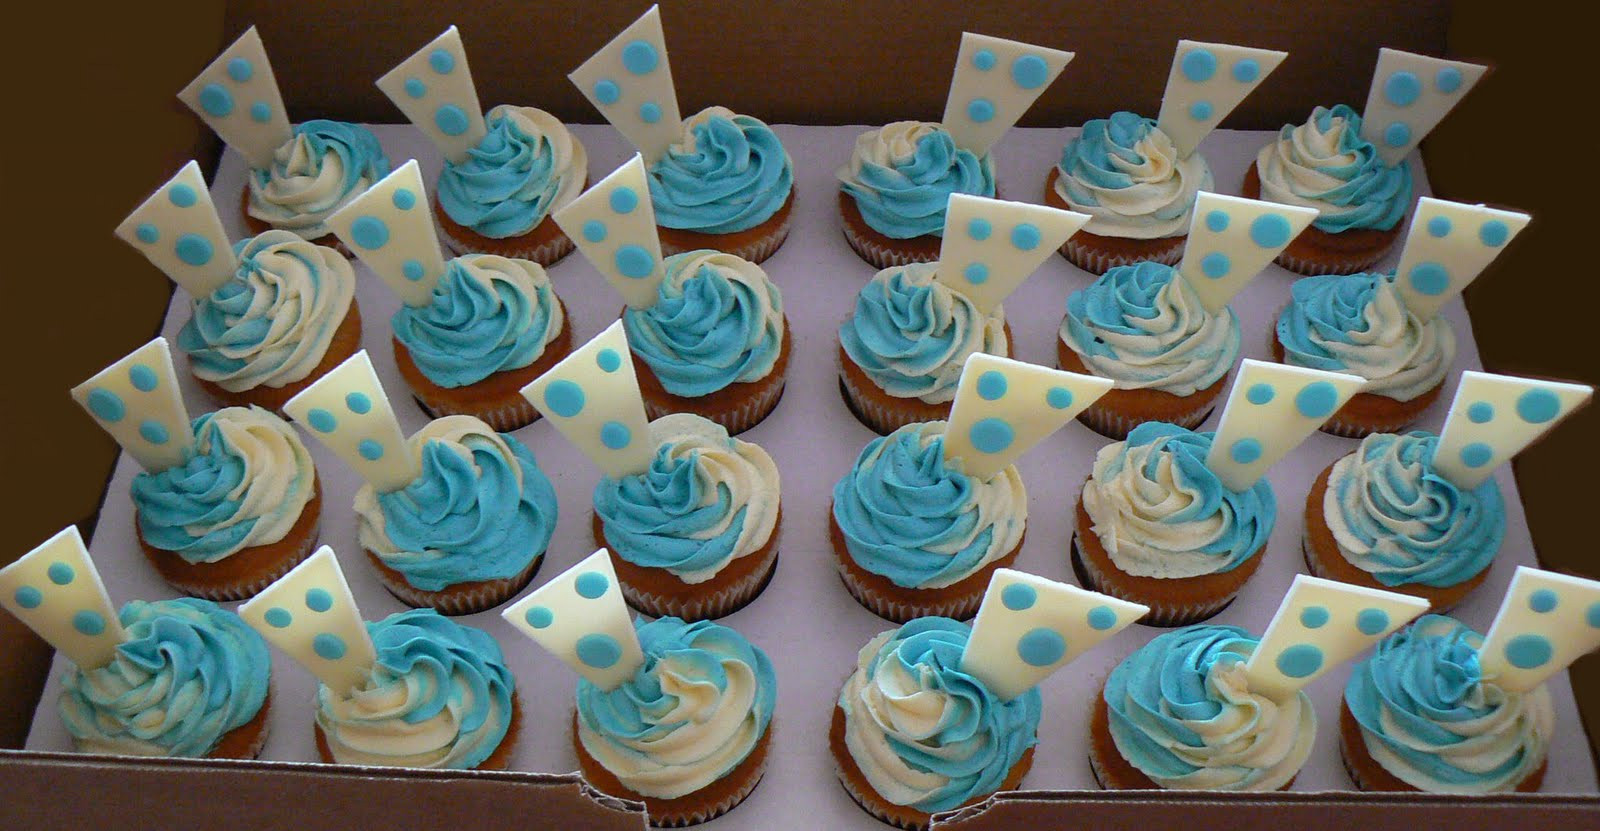 Cupcakes For Baby Shower
 70 Baby Shower Cakes and Cupcakes Ideas